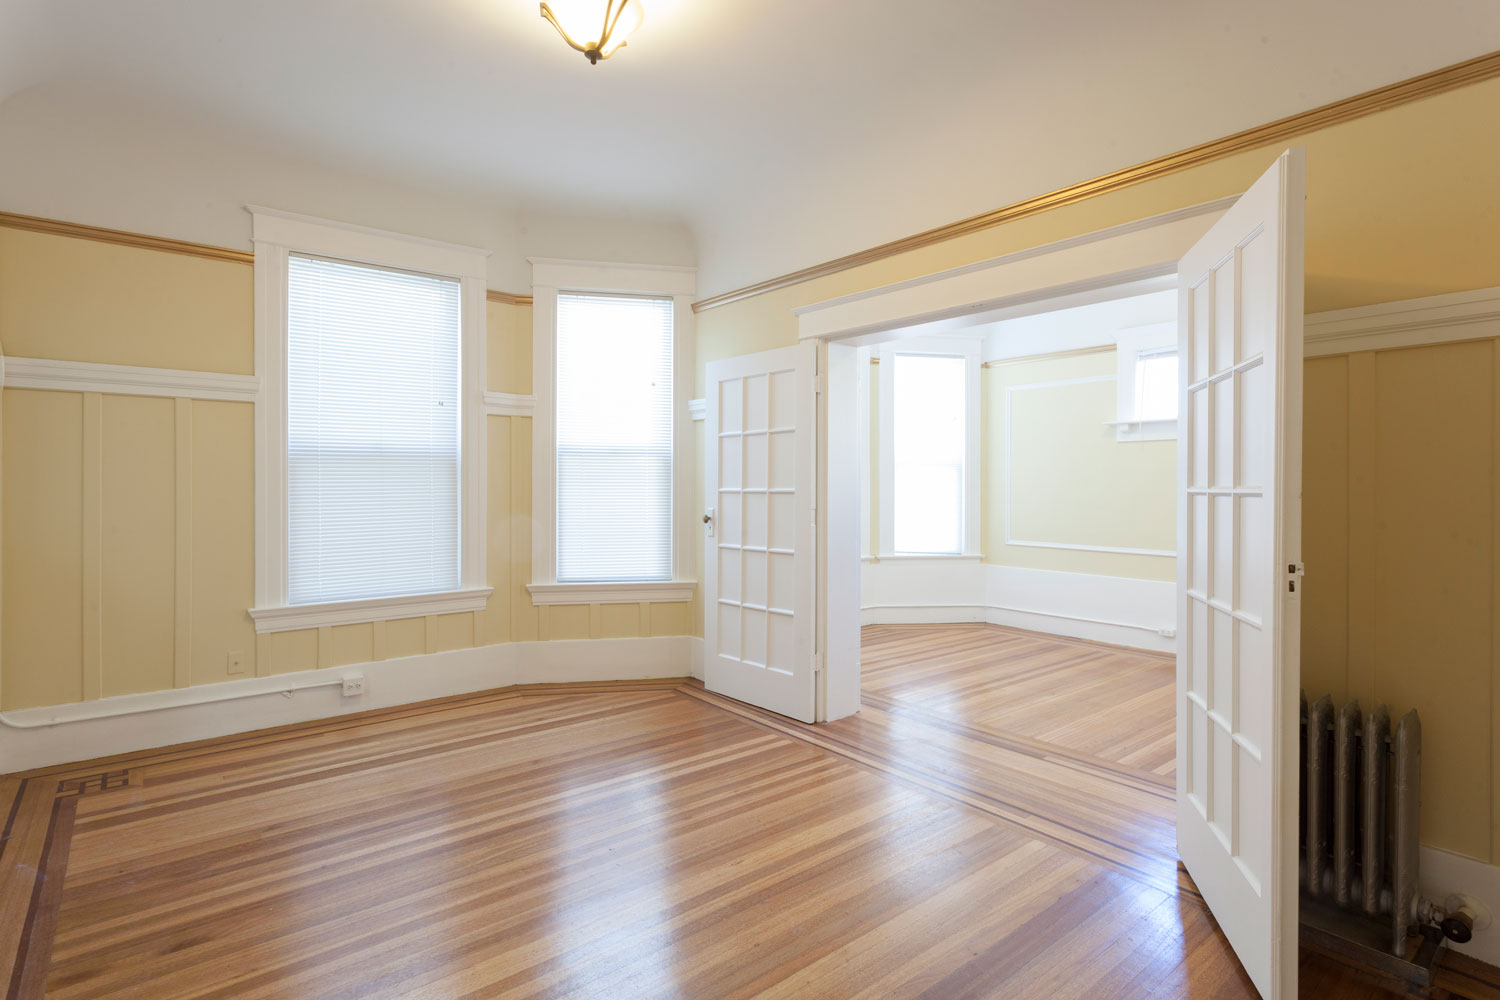 A gorgeous empty living room with wooden flooring, tan painted walls and white wooden painted door, What Color To Paint Interior Doors (6 Suggestions With Pictures)